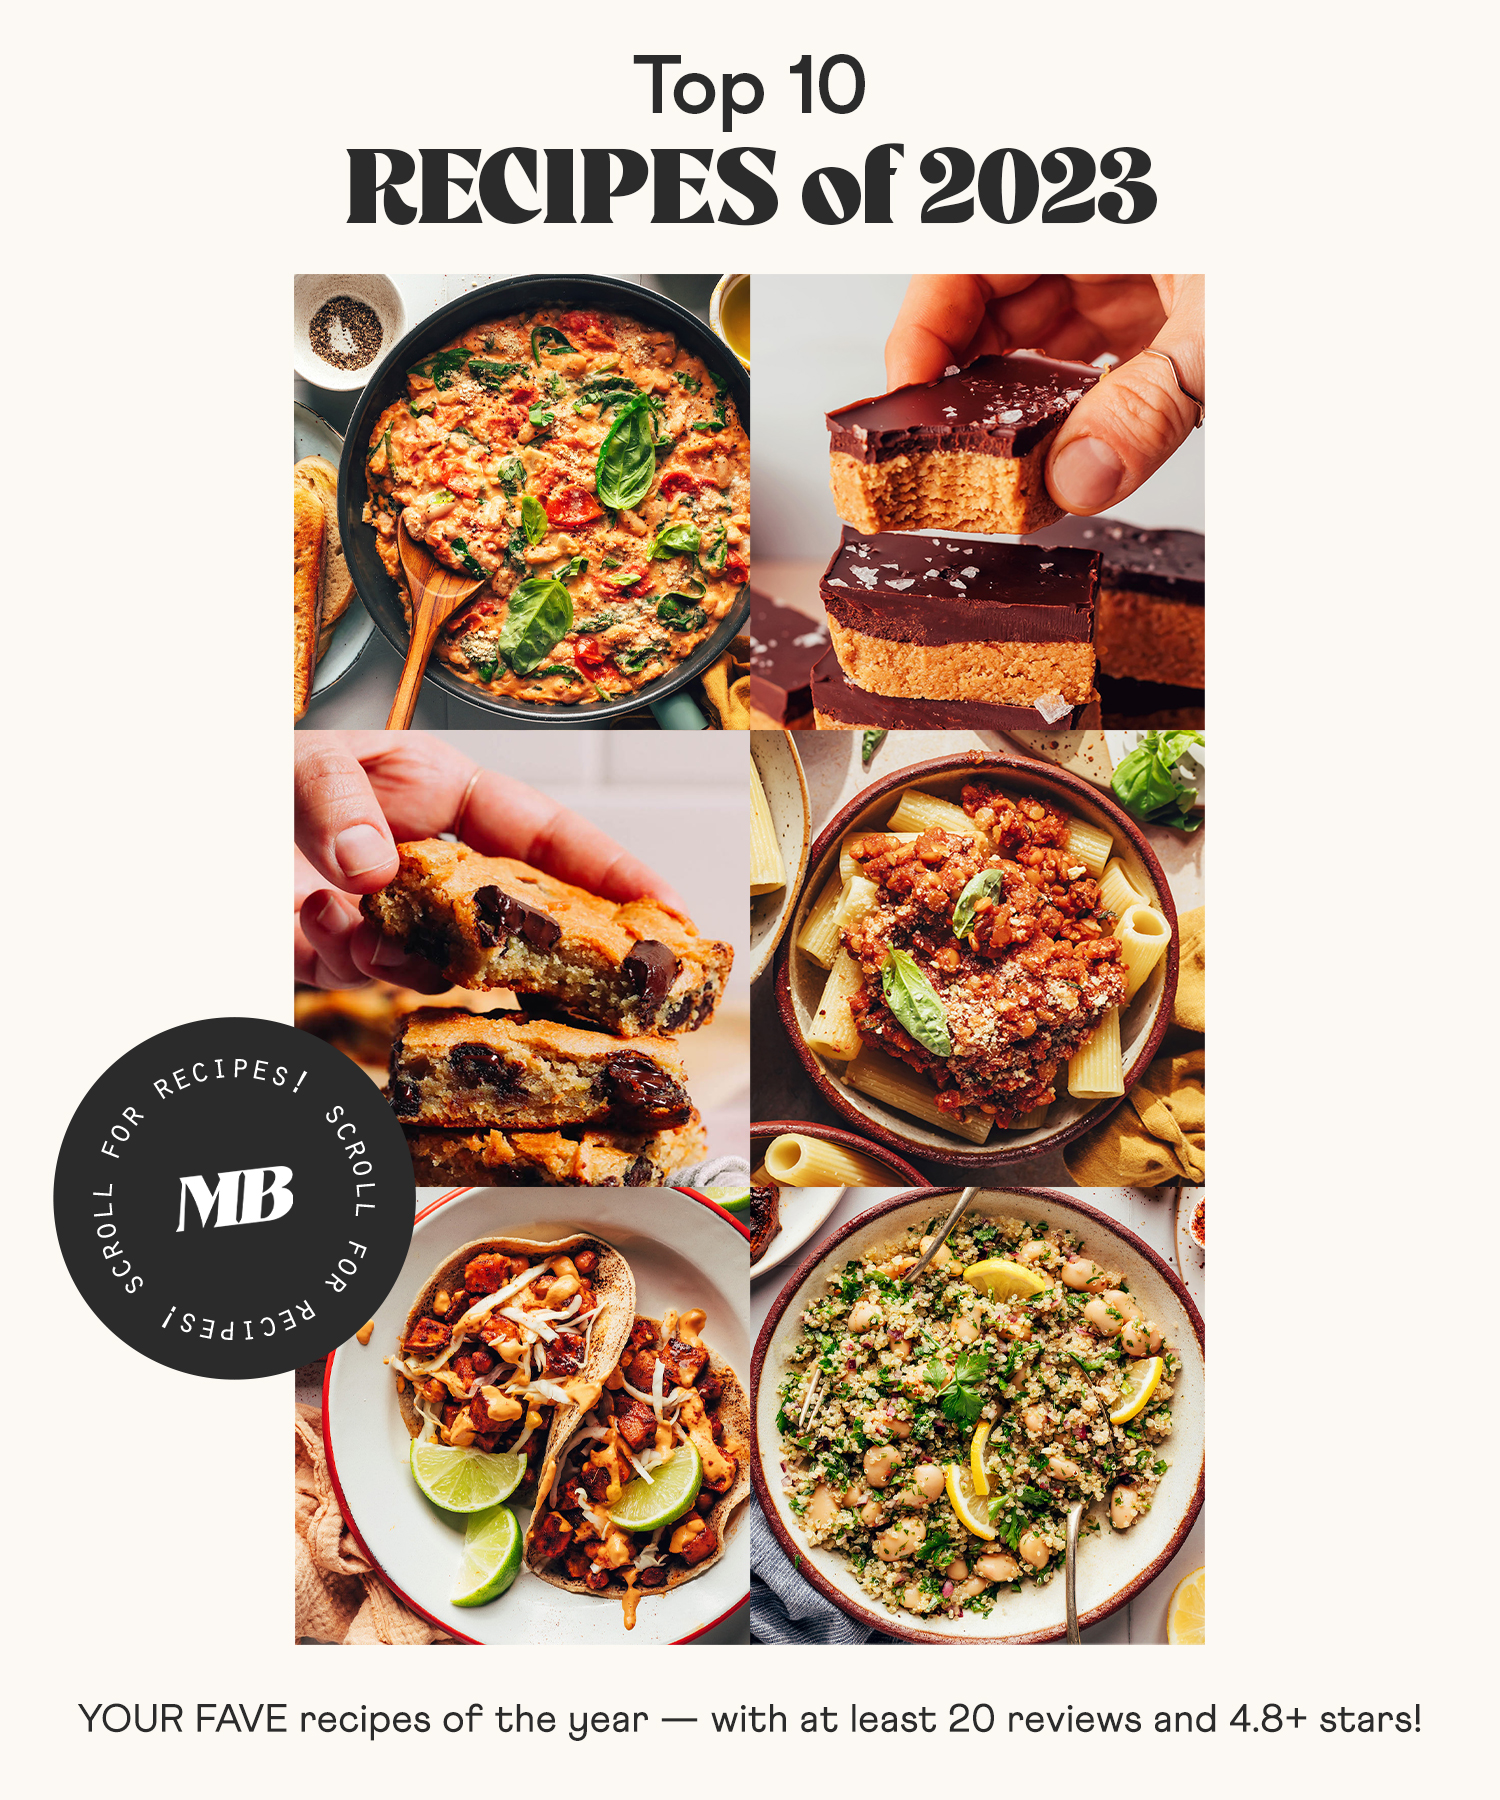 Photos of 6 recipes with text saying "top 10 recipes of 2023 and "your fave recipes of the year with at least 20 reviews and 4.8+ stars"